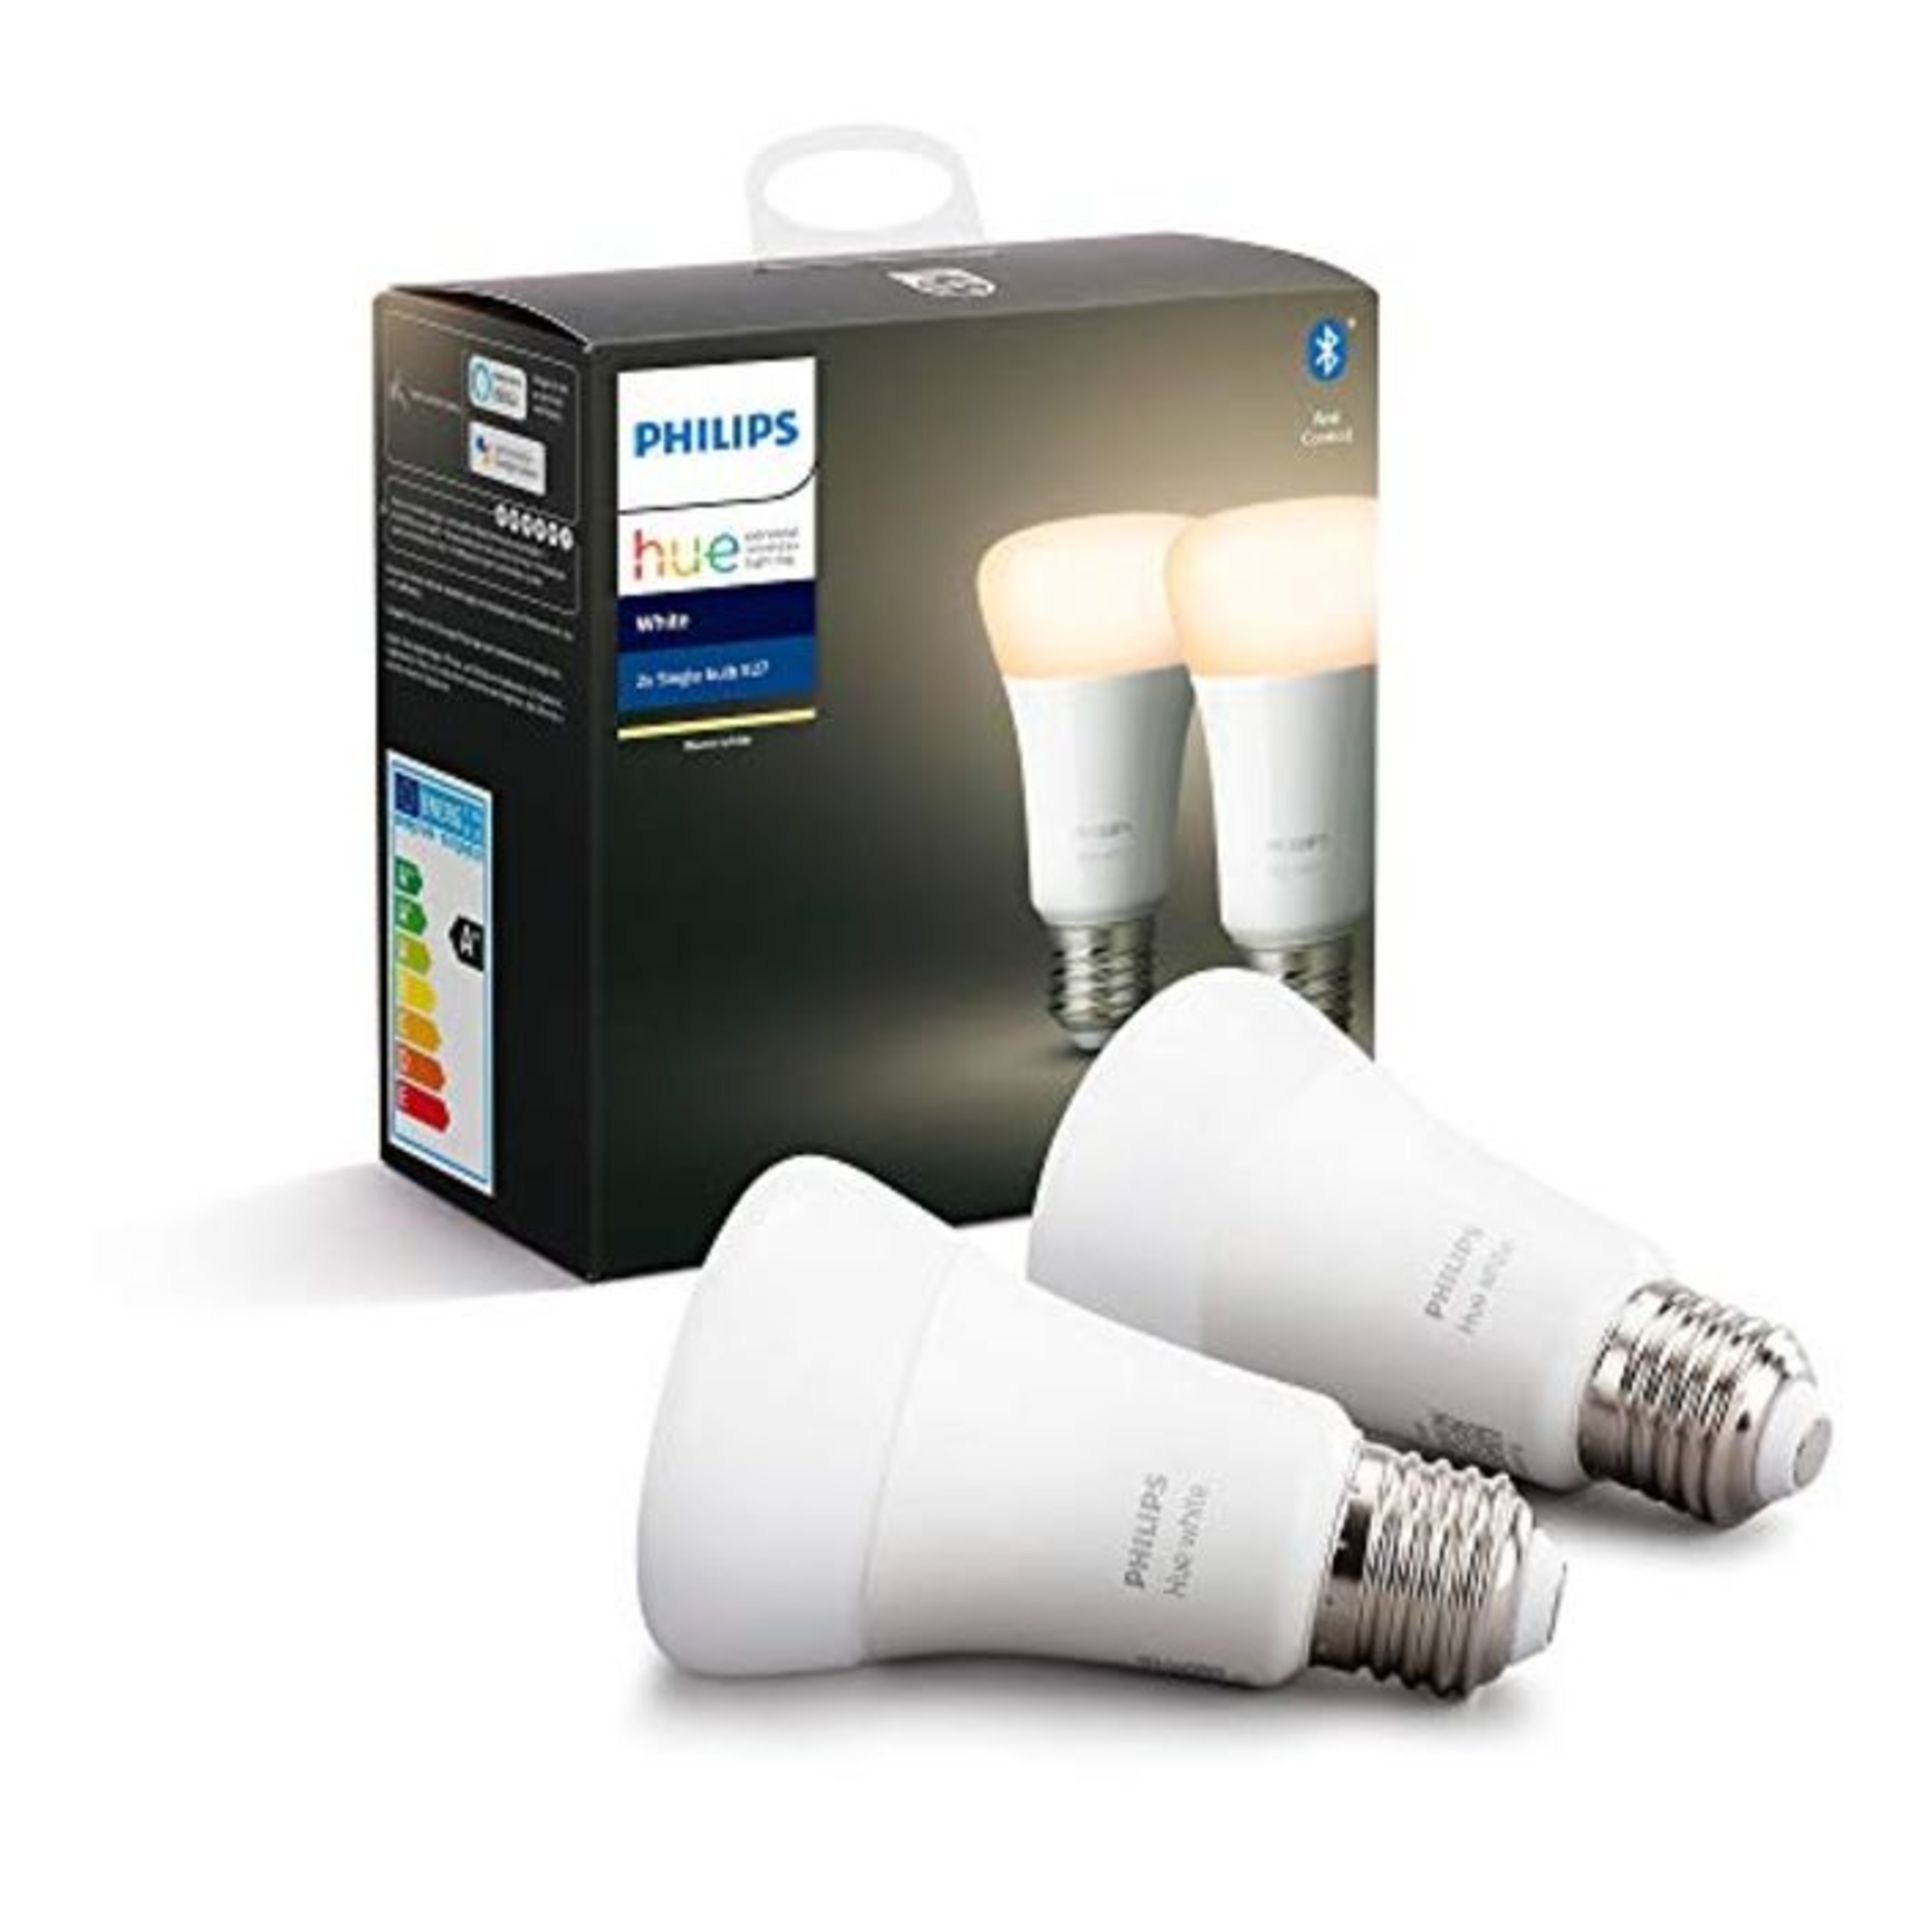 Philips Hue White Smart Bulb Twin Pack LED [E27 Edison Screw] with Bluetooth. Works wi